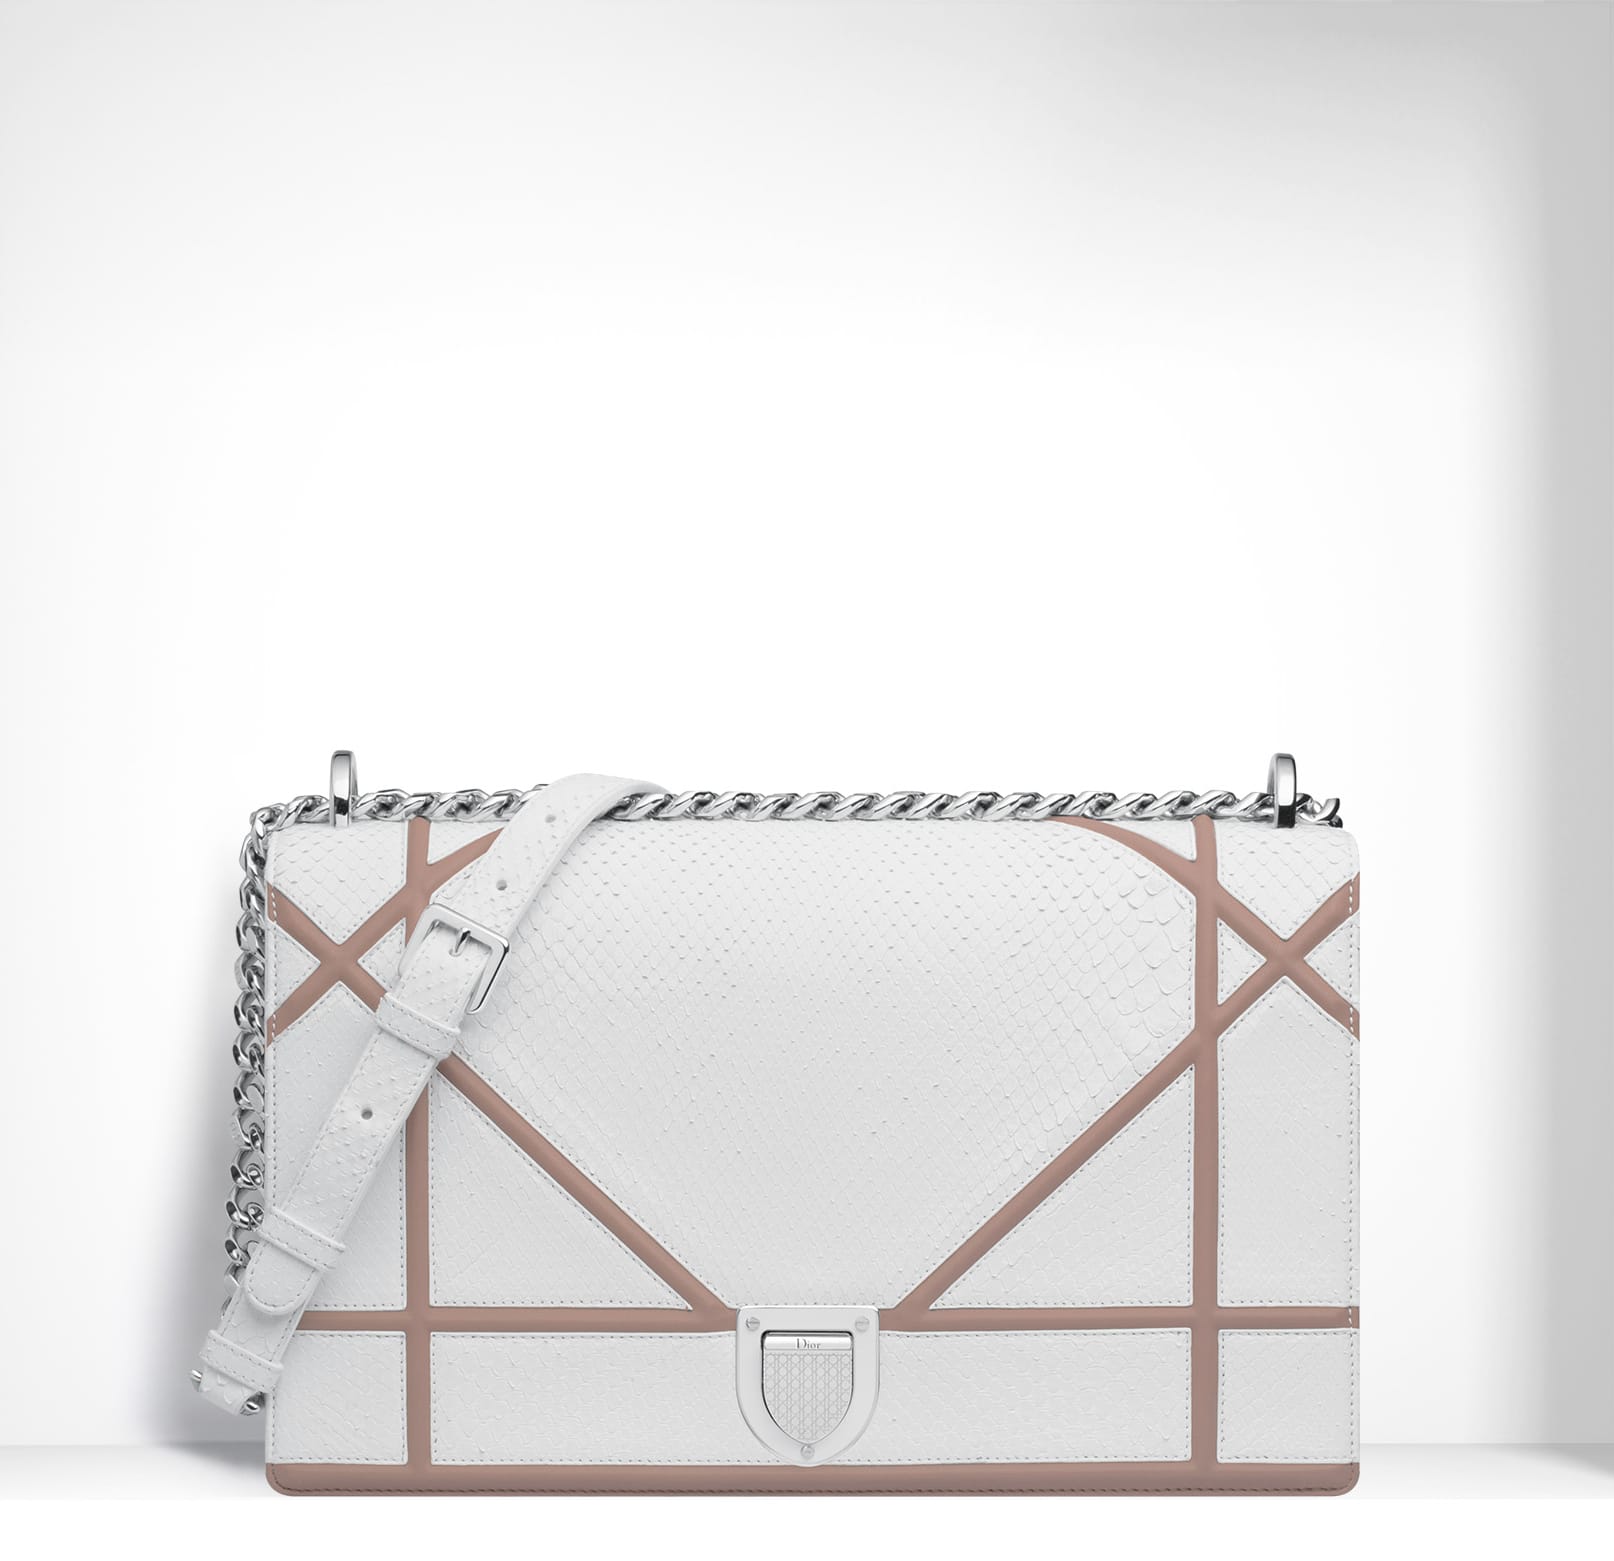 Dior Diorama Flap Bag Reference Guide - Spotted Fashion